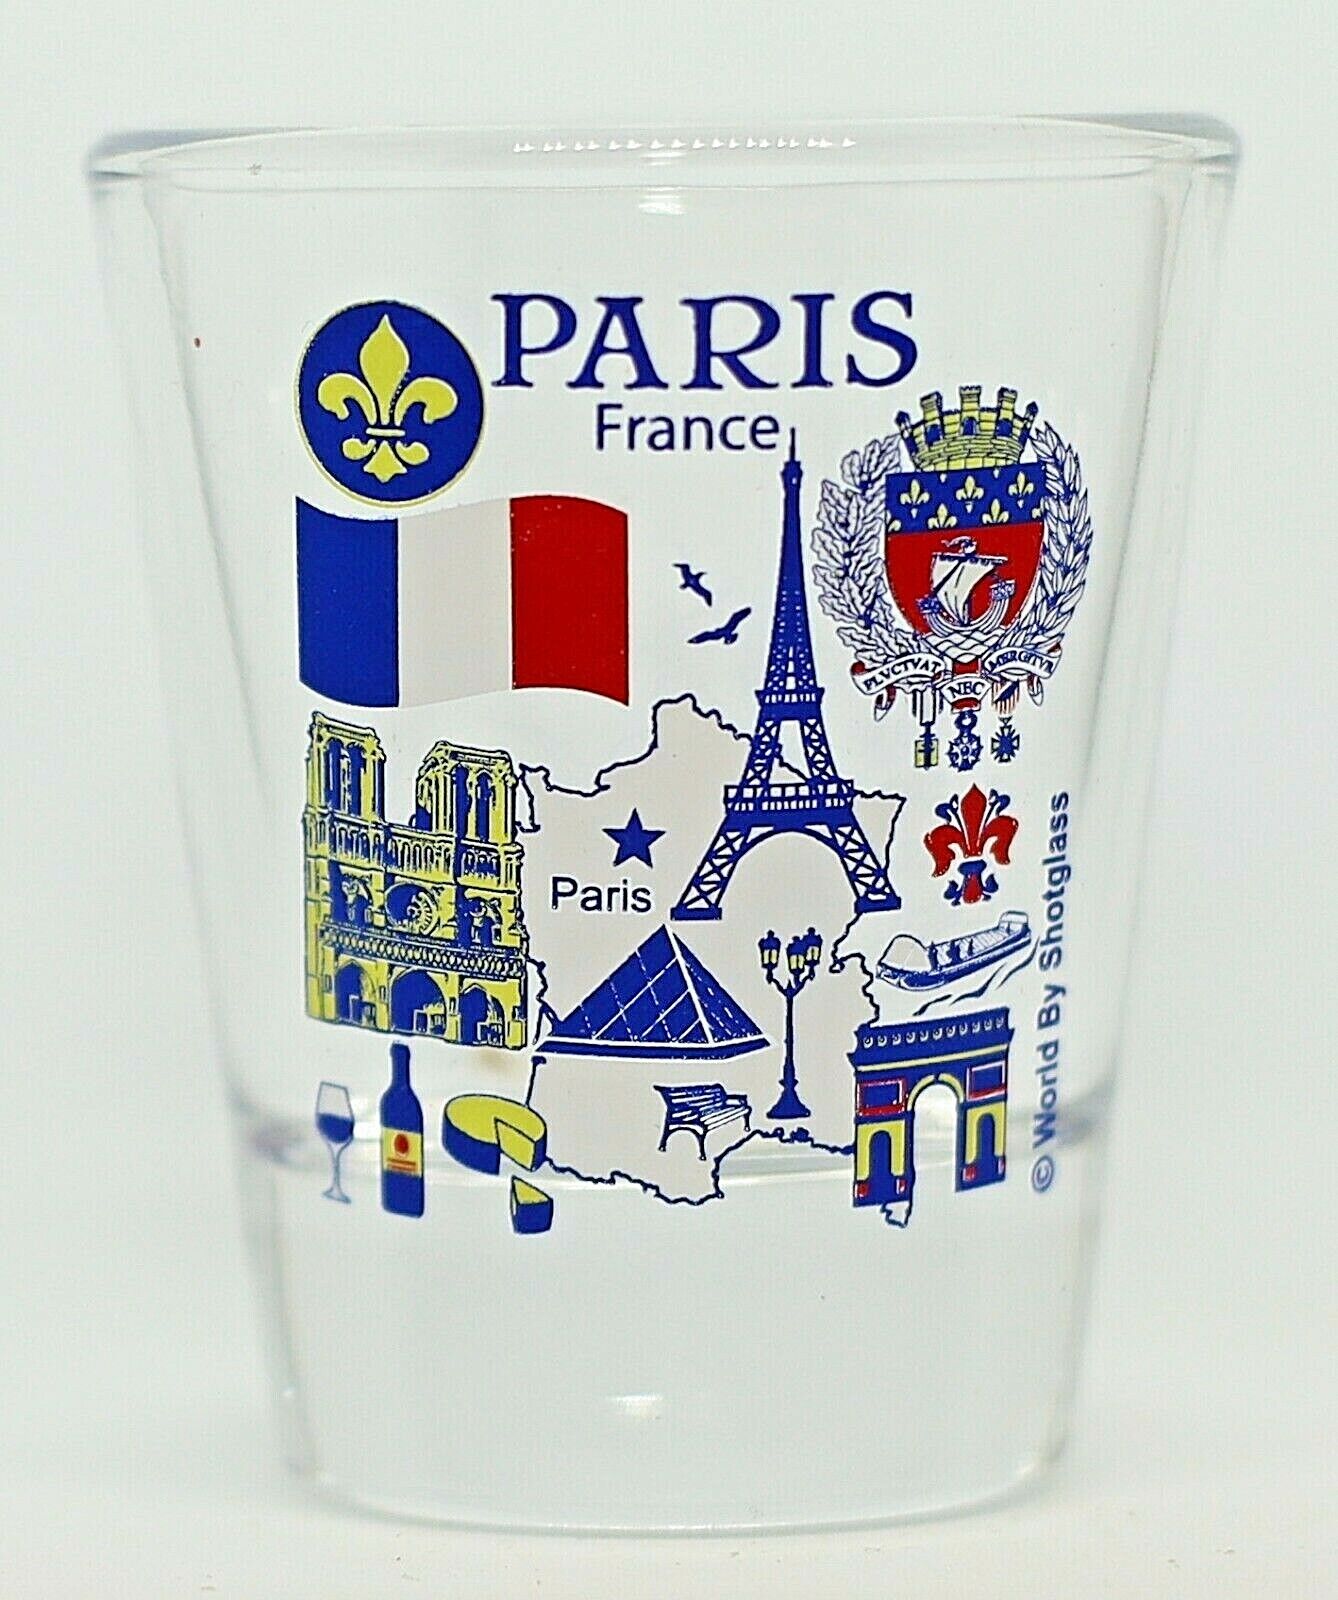 PARIS FRANCE GREAT FRENCH CITIES COLLECTION SHOT GLASS SHOTGLASS